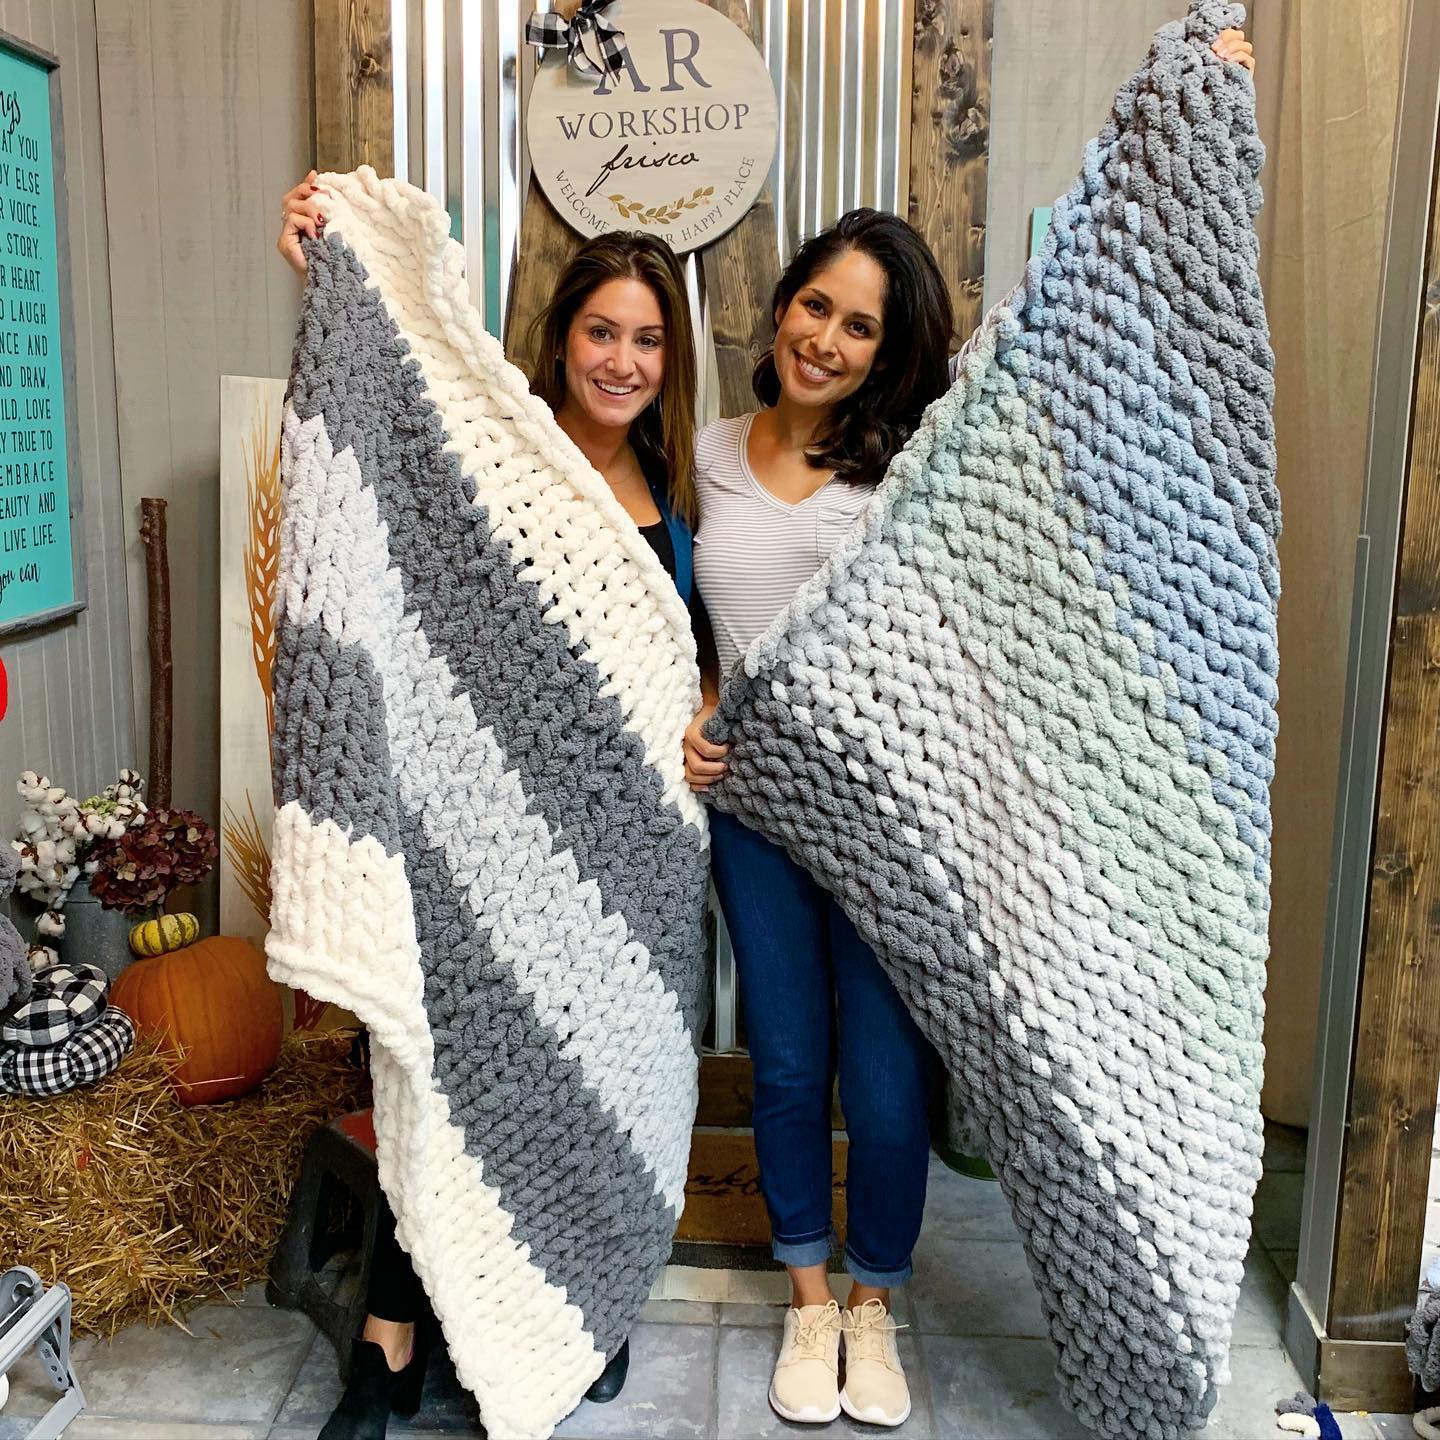 In AR Workshop, two happy ladies show off their crocheted blanket